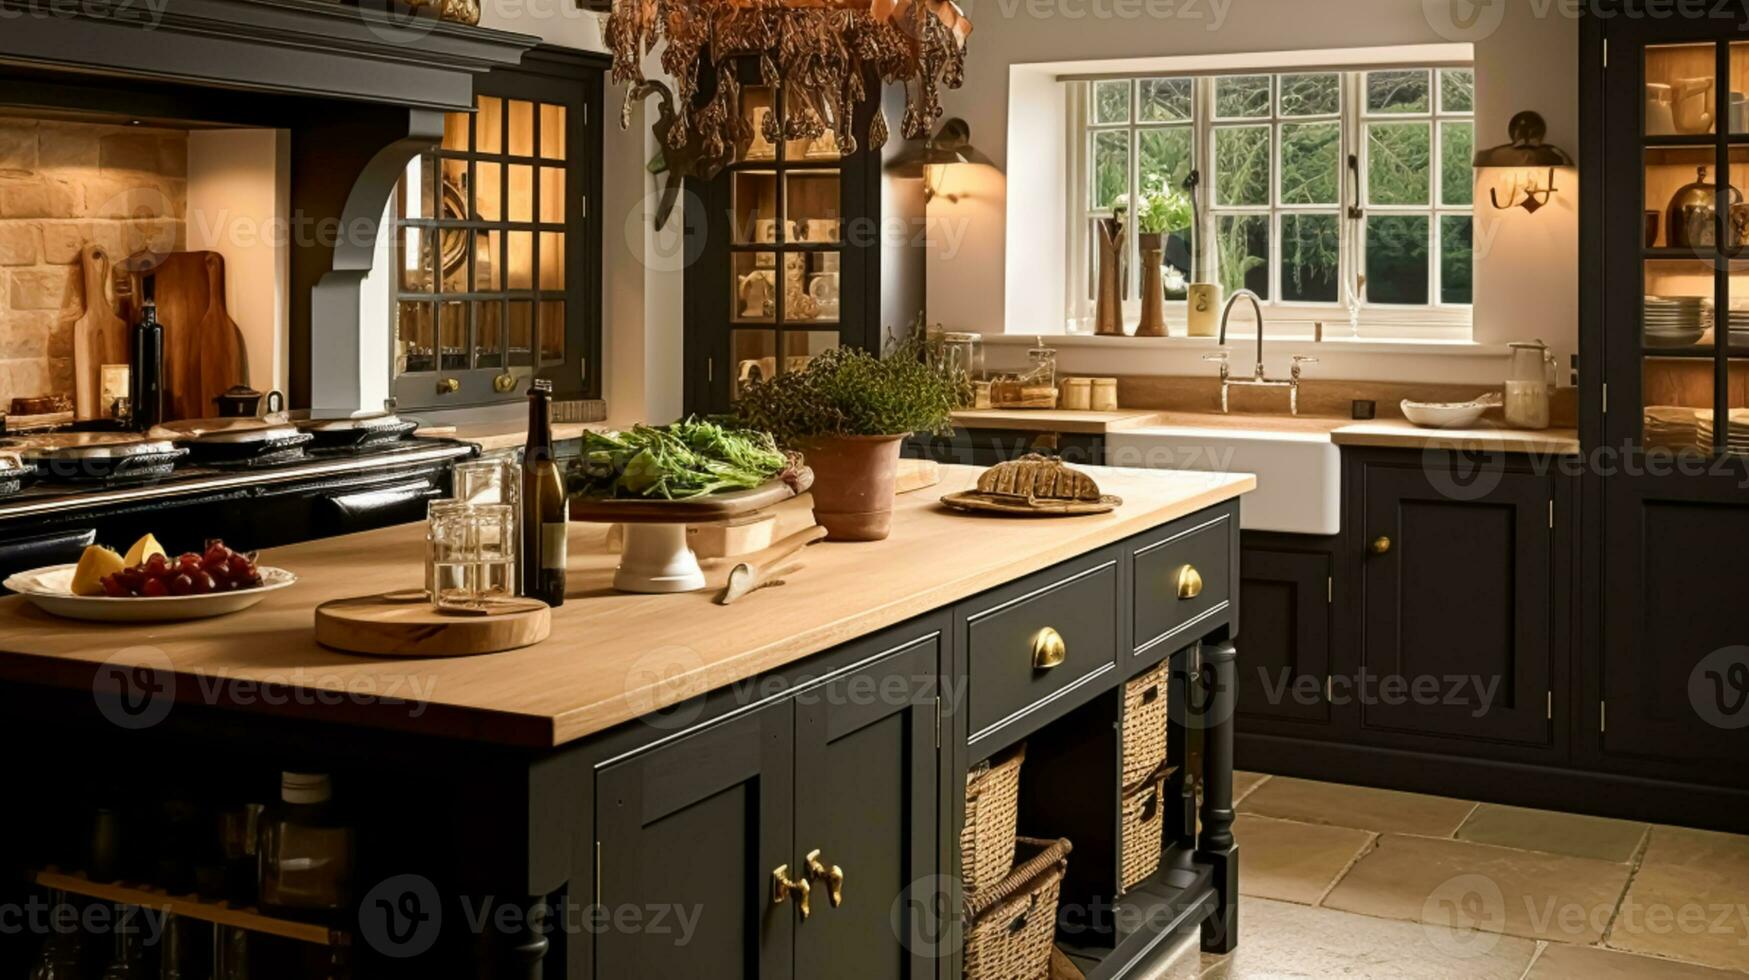 Autumnal kitchen decor, interior design and house decoration, classic English kitchen decorated for autumn season in a country house, elegant cottage style photo